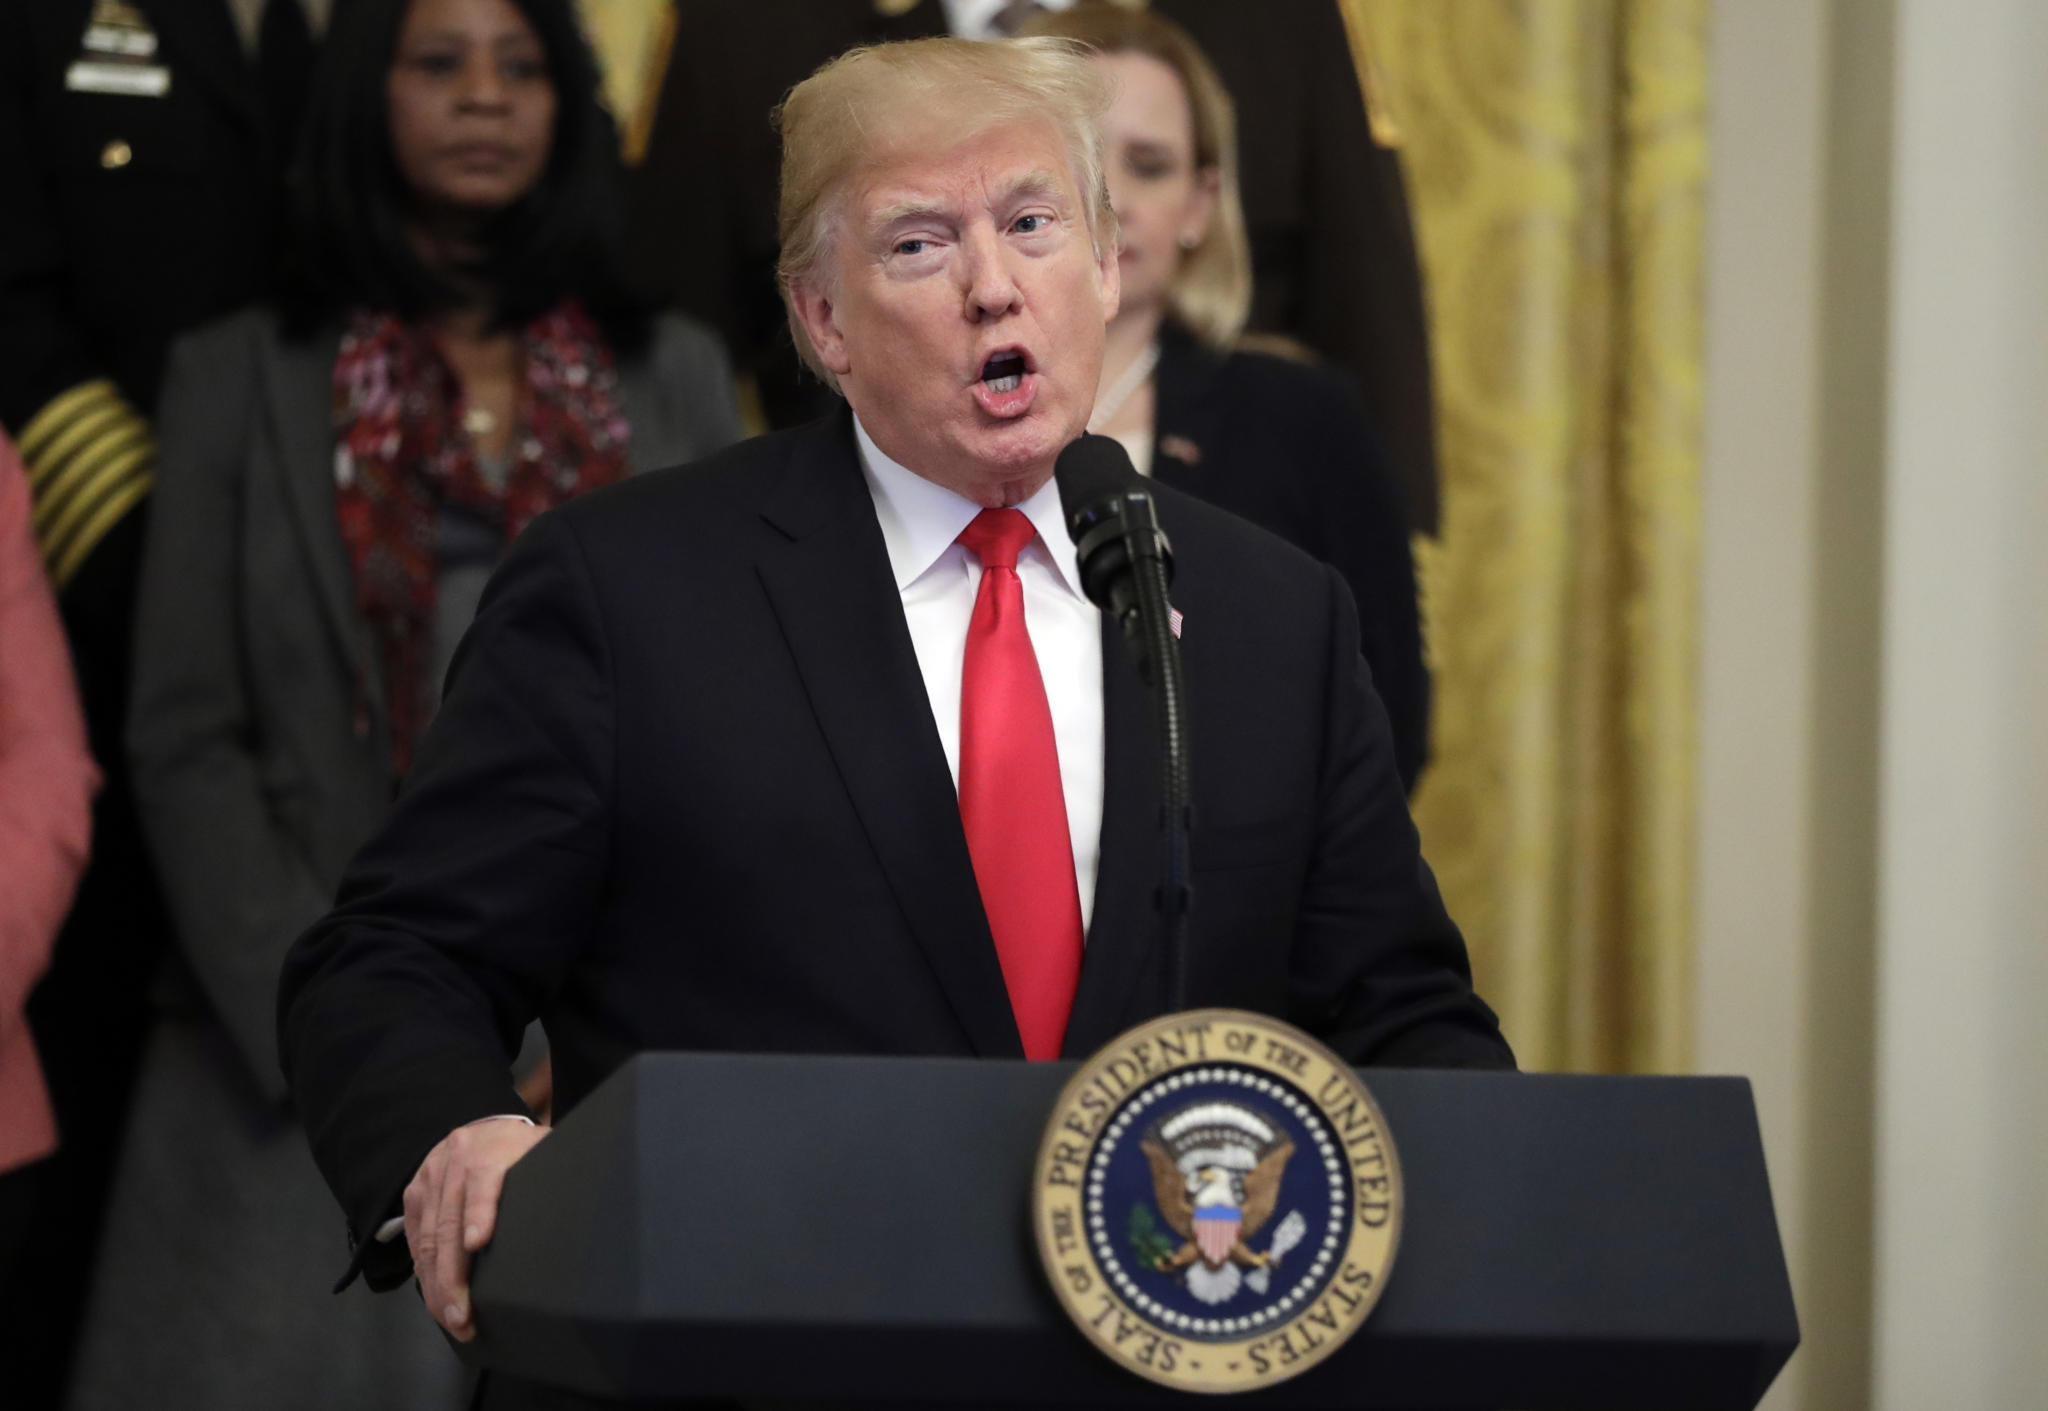 President Donald Trump speaks about crude pipe bombs targeting Hillary Clinton, former President Barack Obama, CNN and others, during an event on the opioid crisis, in the East Room of the White House, Wednesday, Oct. 24, 2018, in Washington. (AP Photo/Evan Vucci)